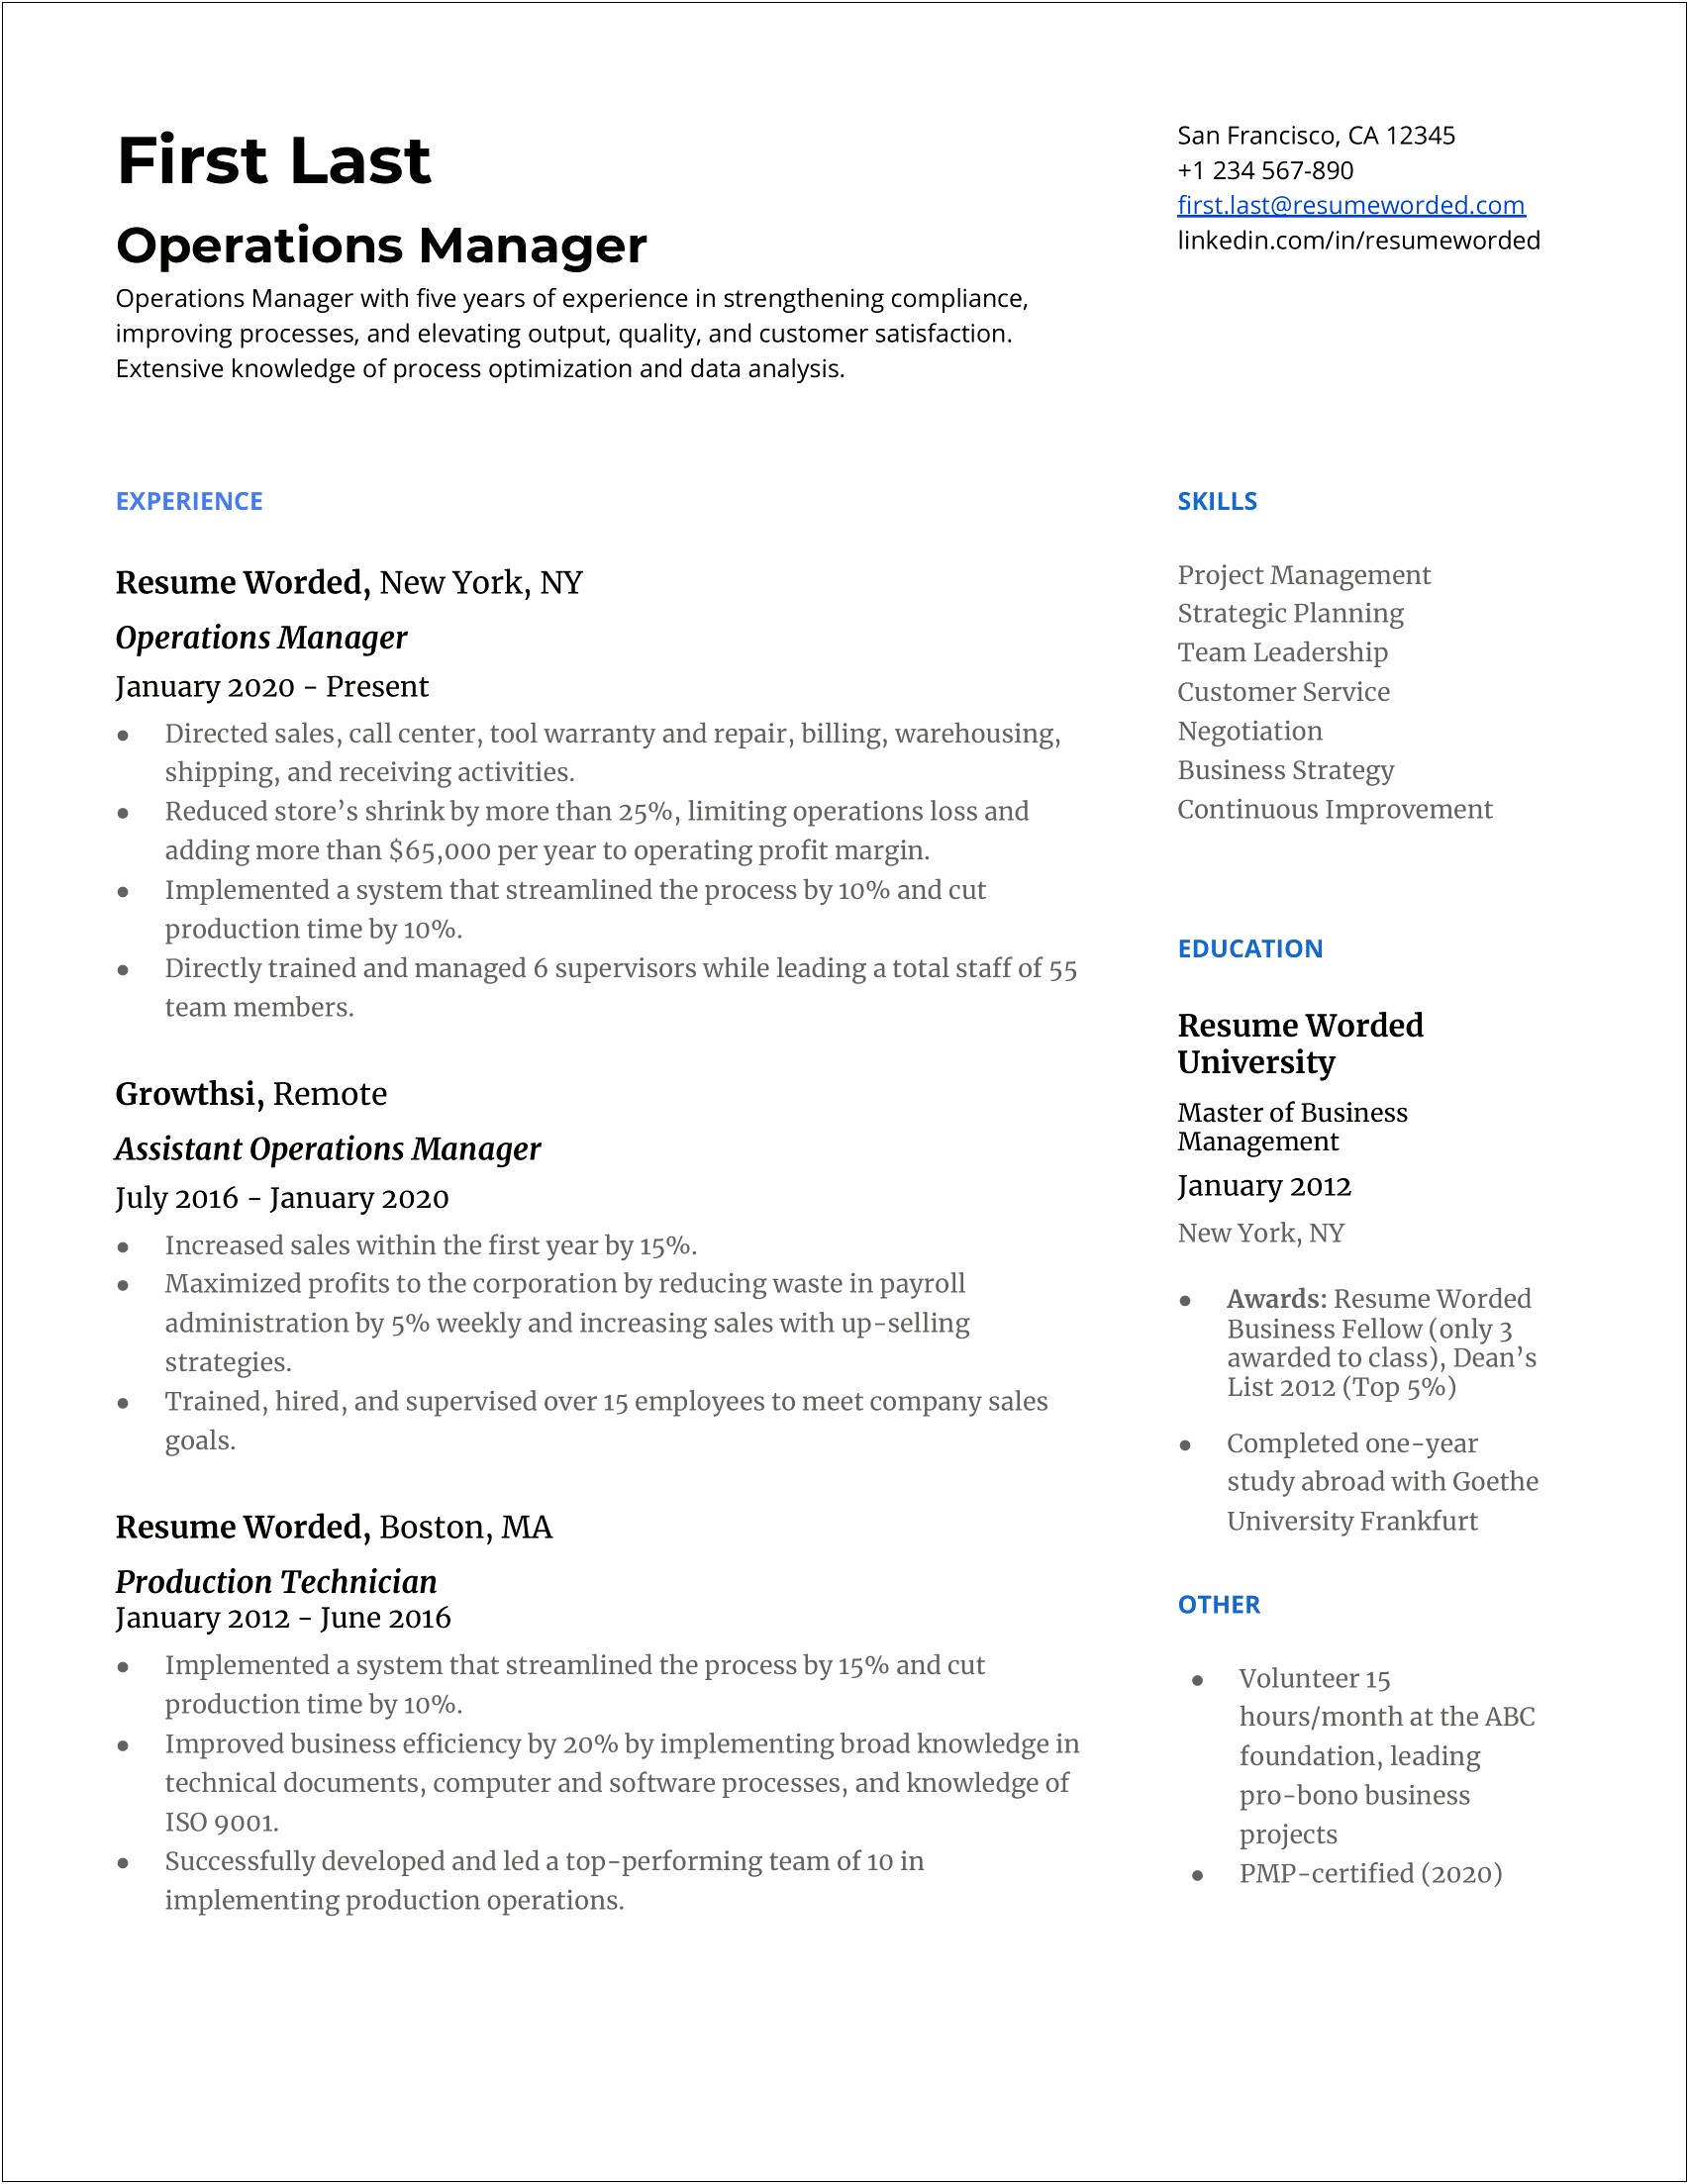 Resume Bullet Points For Production Manager